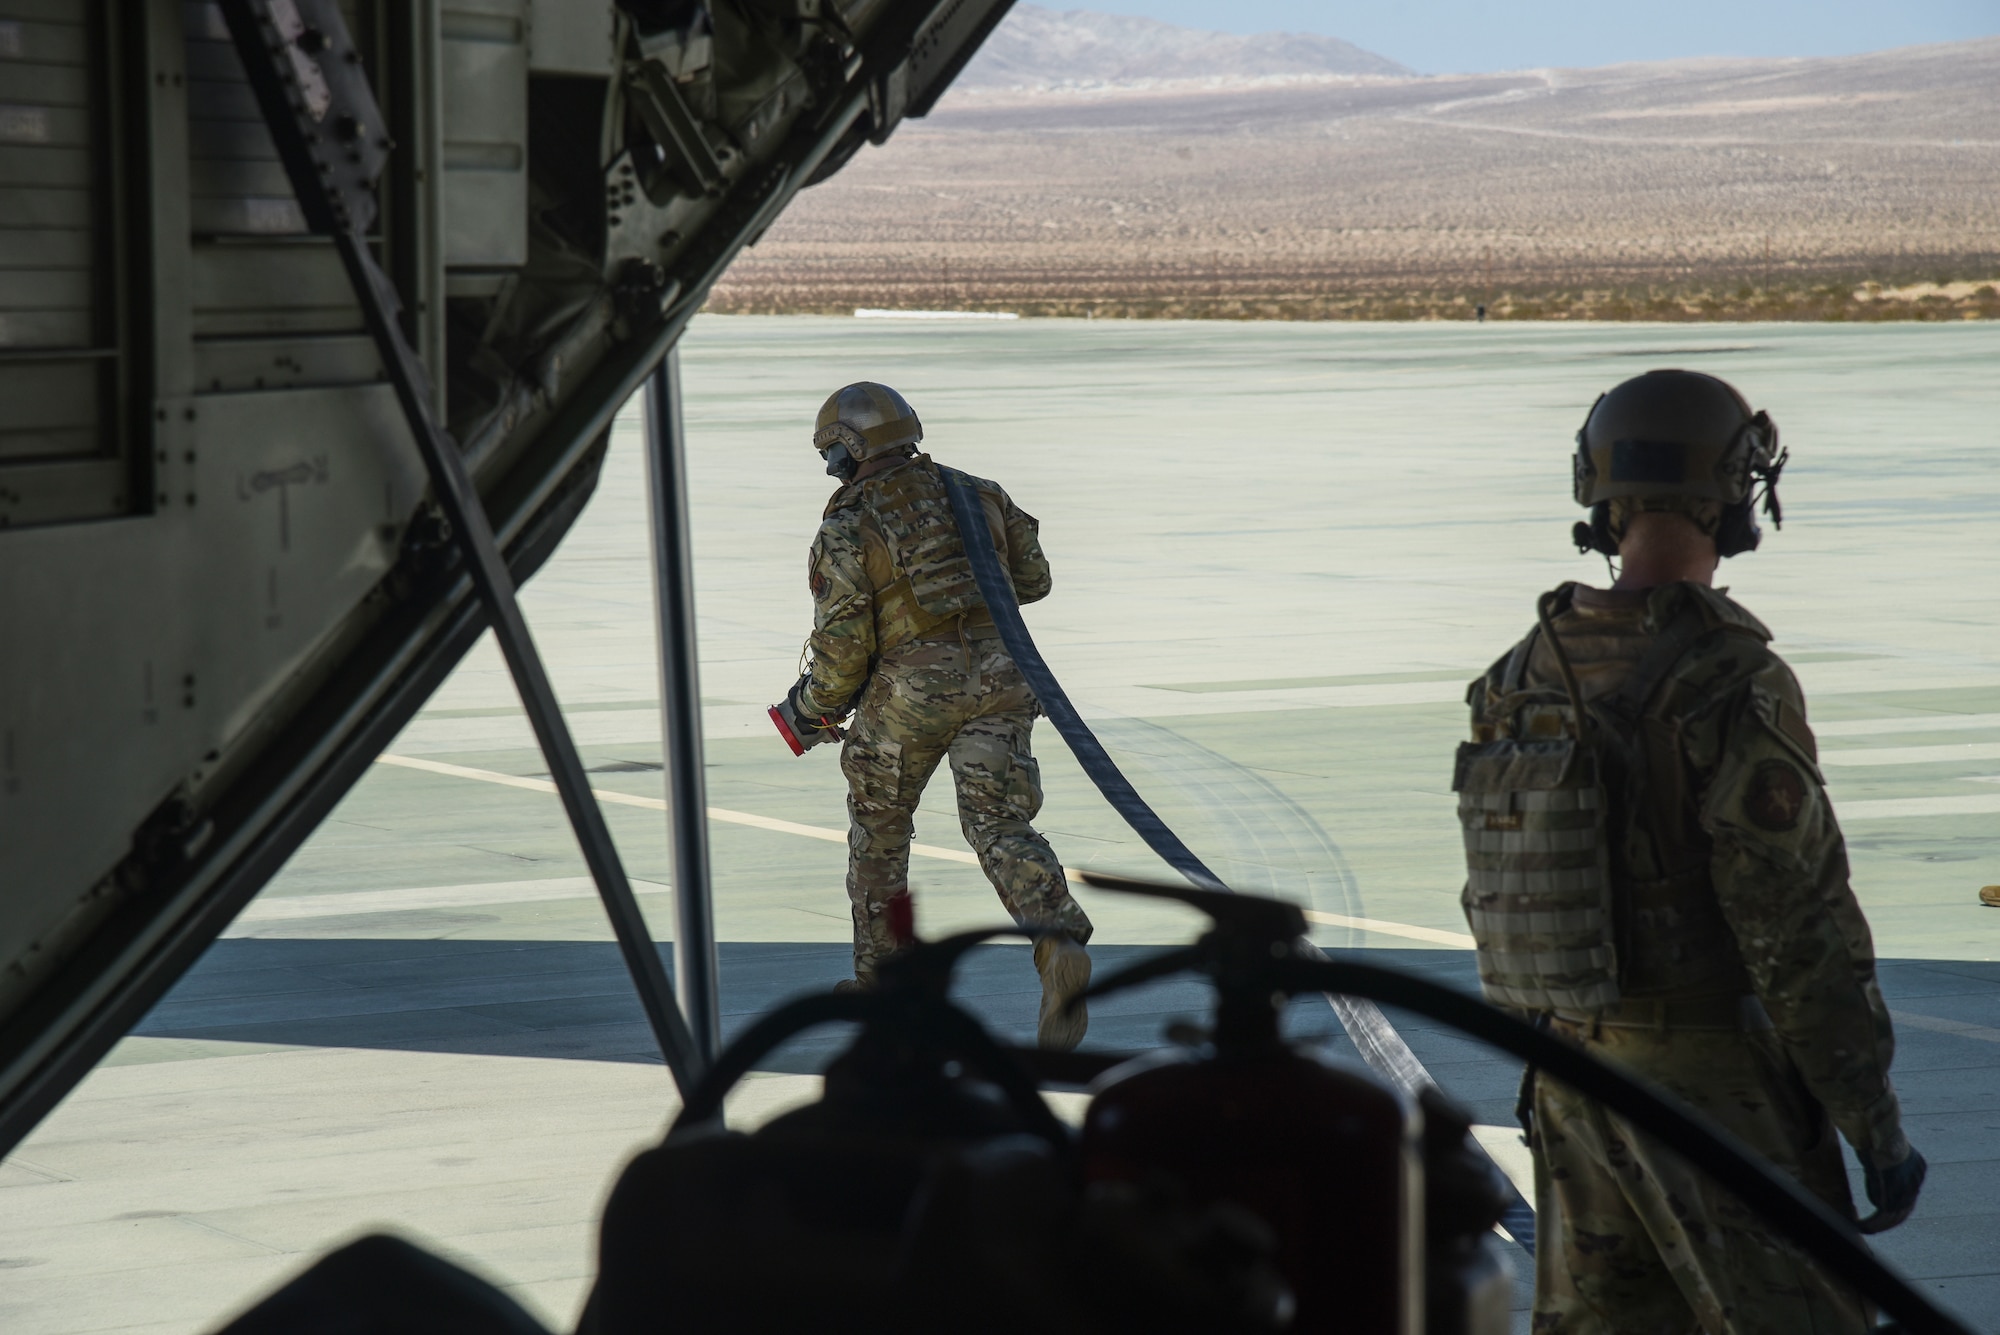 Pictured above are two Airmen, one Airman runs with a hose while the other waits on standby.